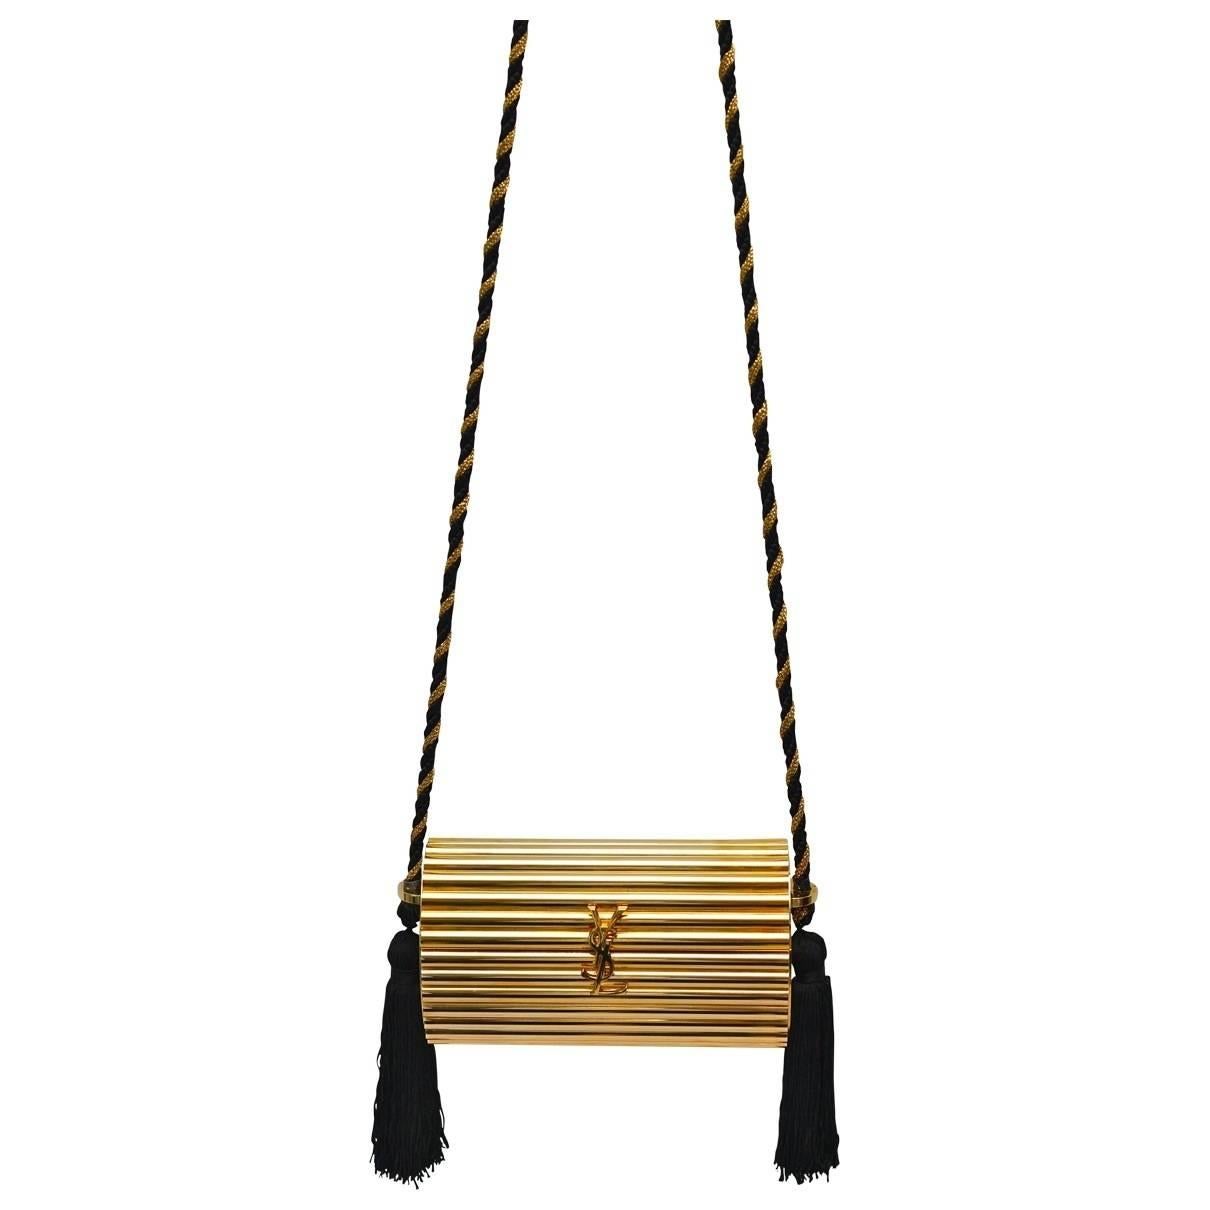 YVES SAINT LAURENT rare and collectable vintage gold tone ribbed minaudiere featuring :

- Hard box cylindric resin  body.
- Large YSL logo at the front.
- Black and gold braided shoulder strap.
- Long black tassels.
- Gold canvas